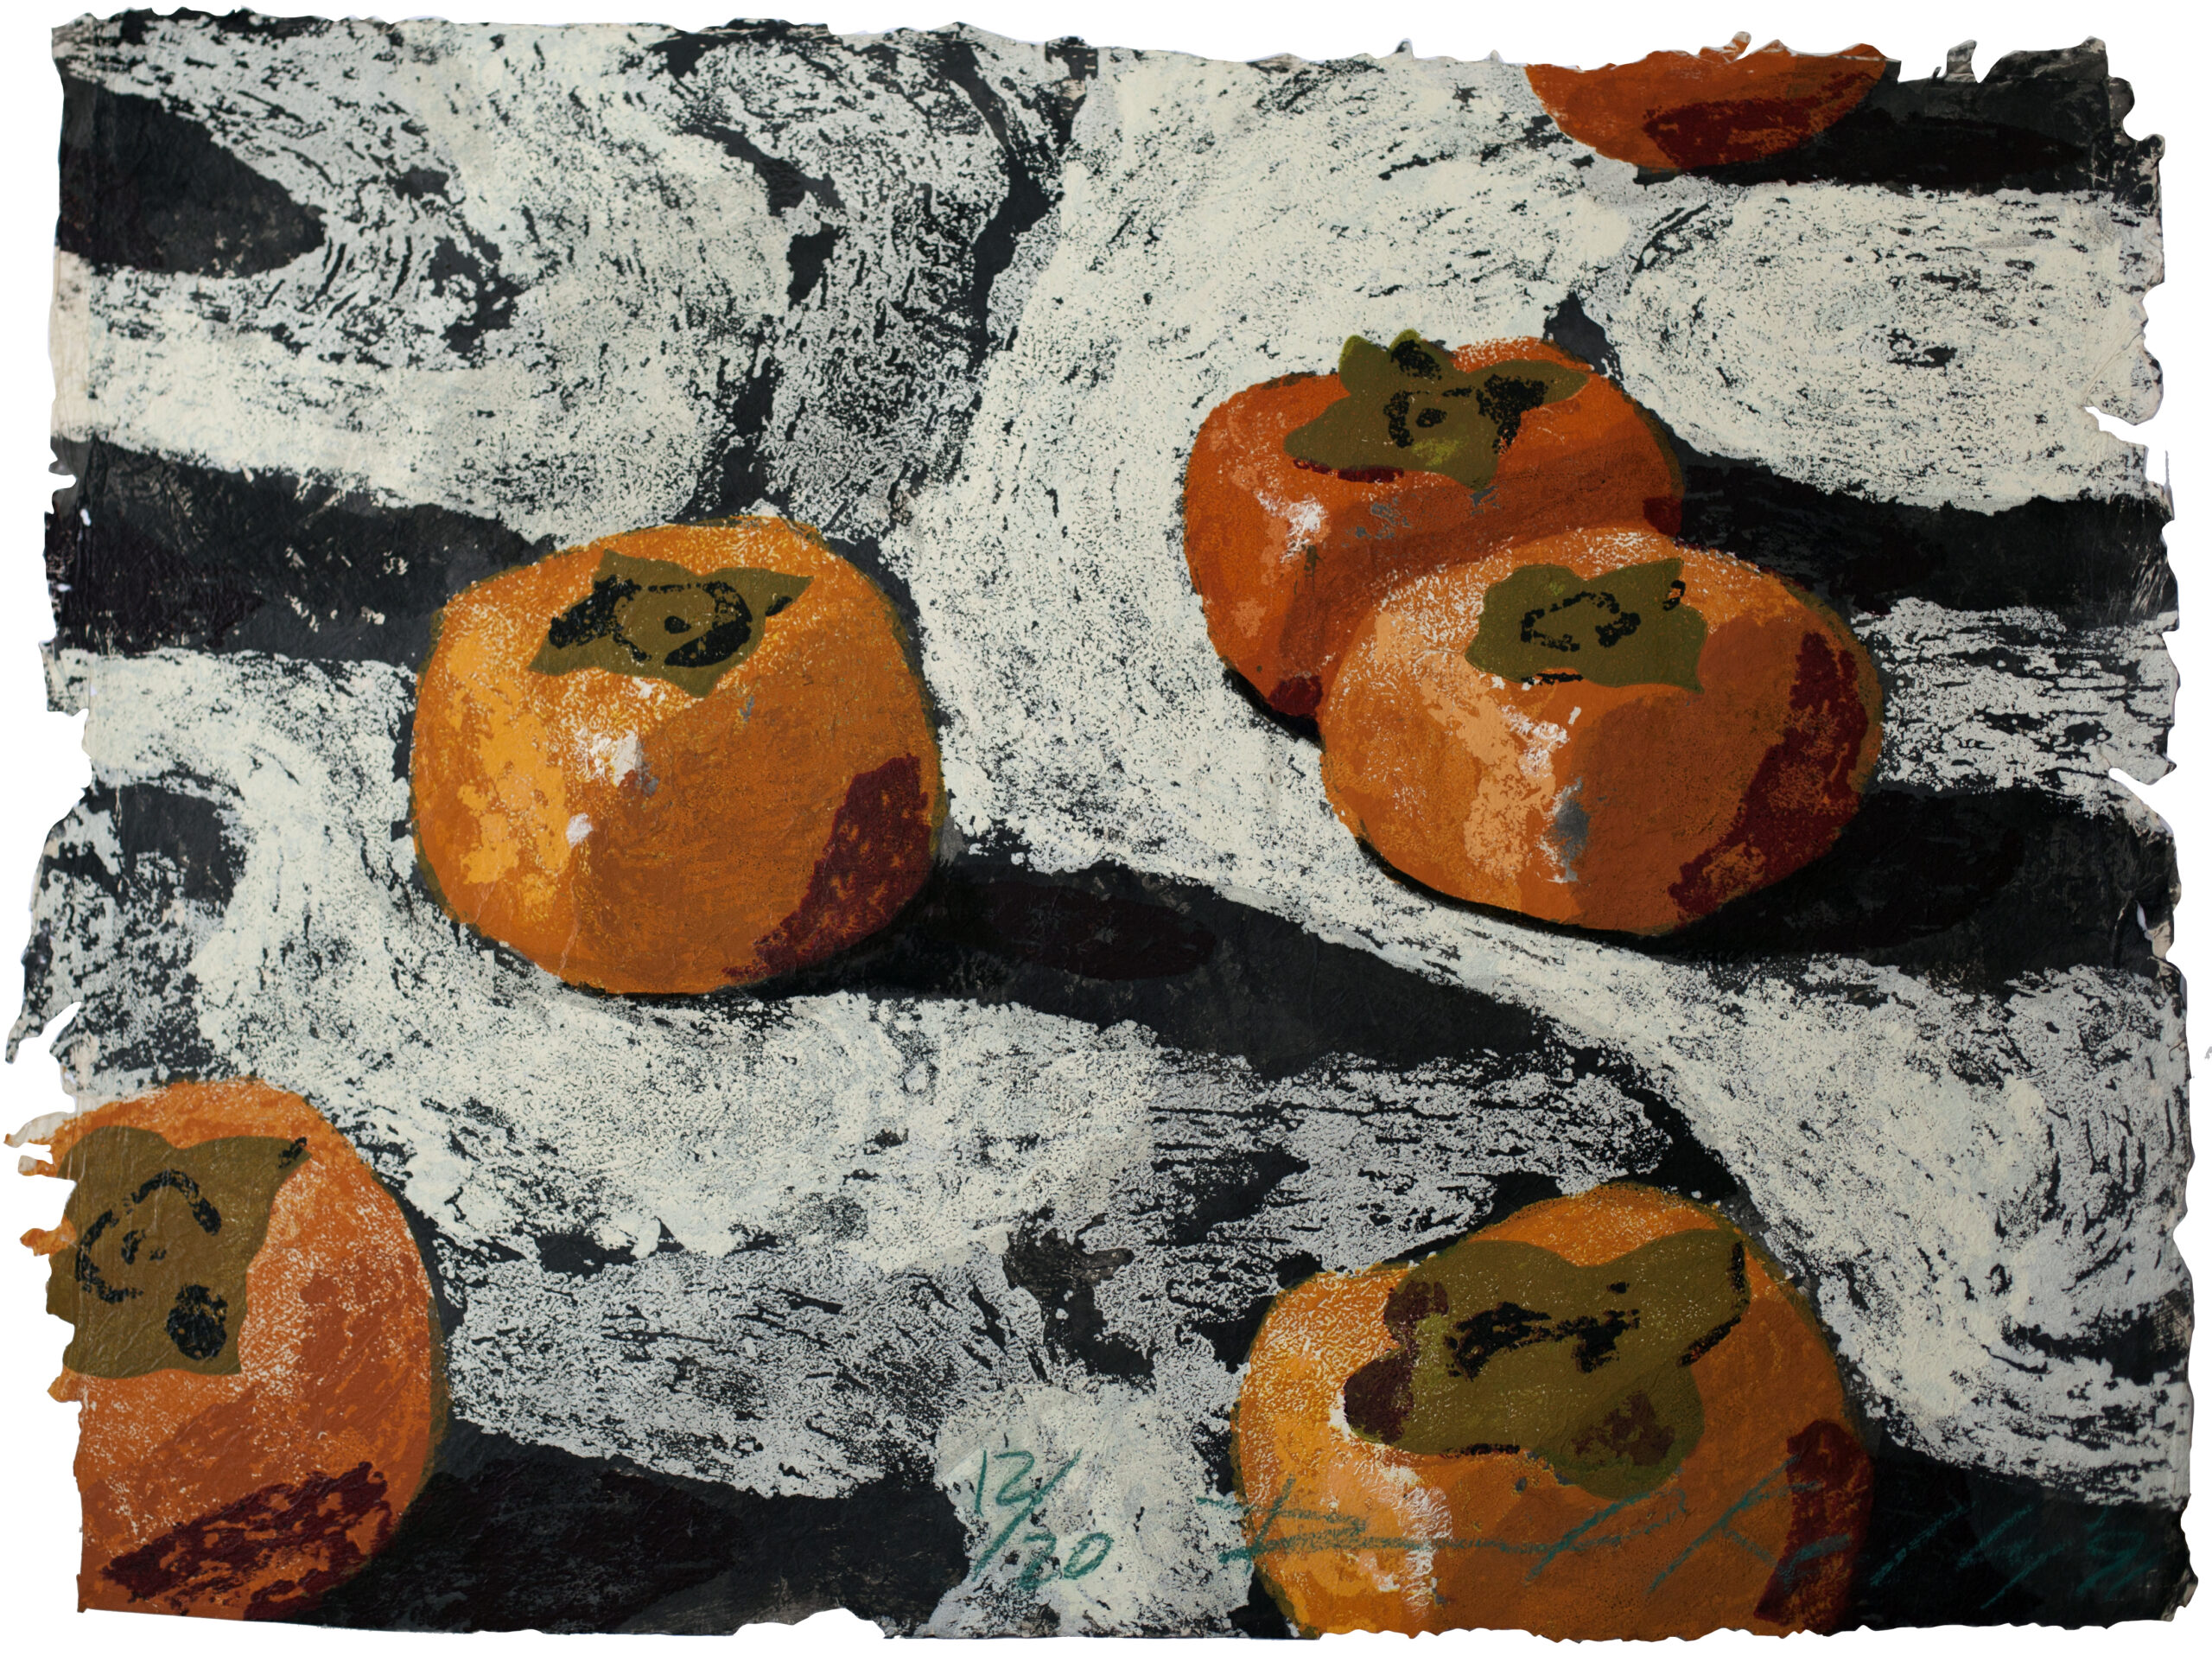 Persimmons by Daniel Kelly